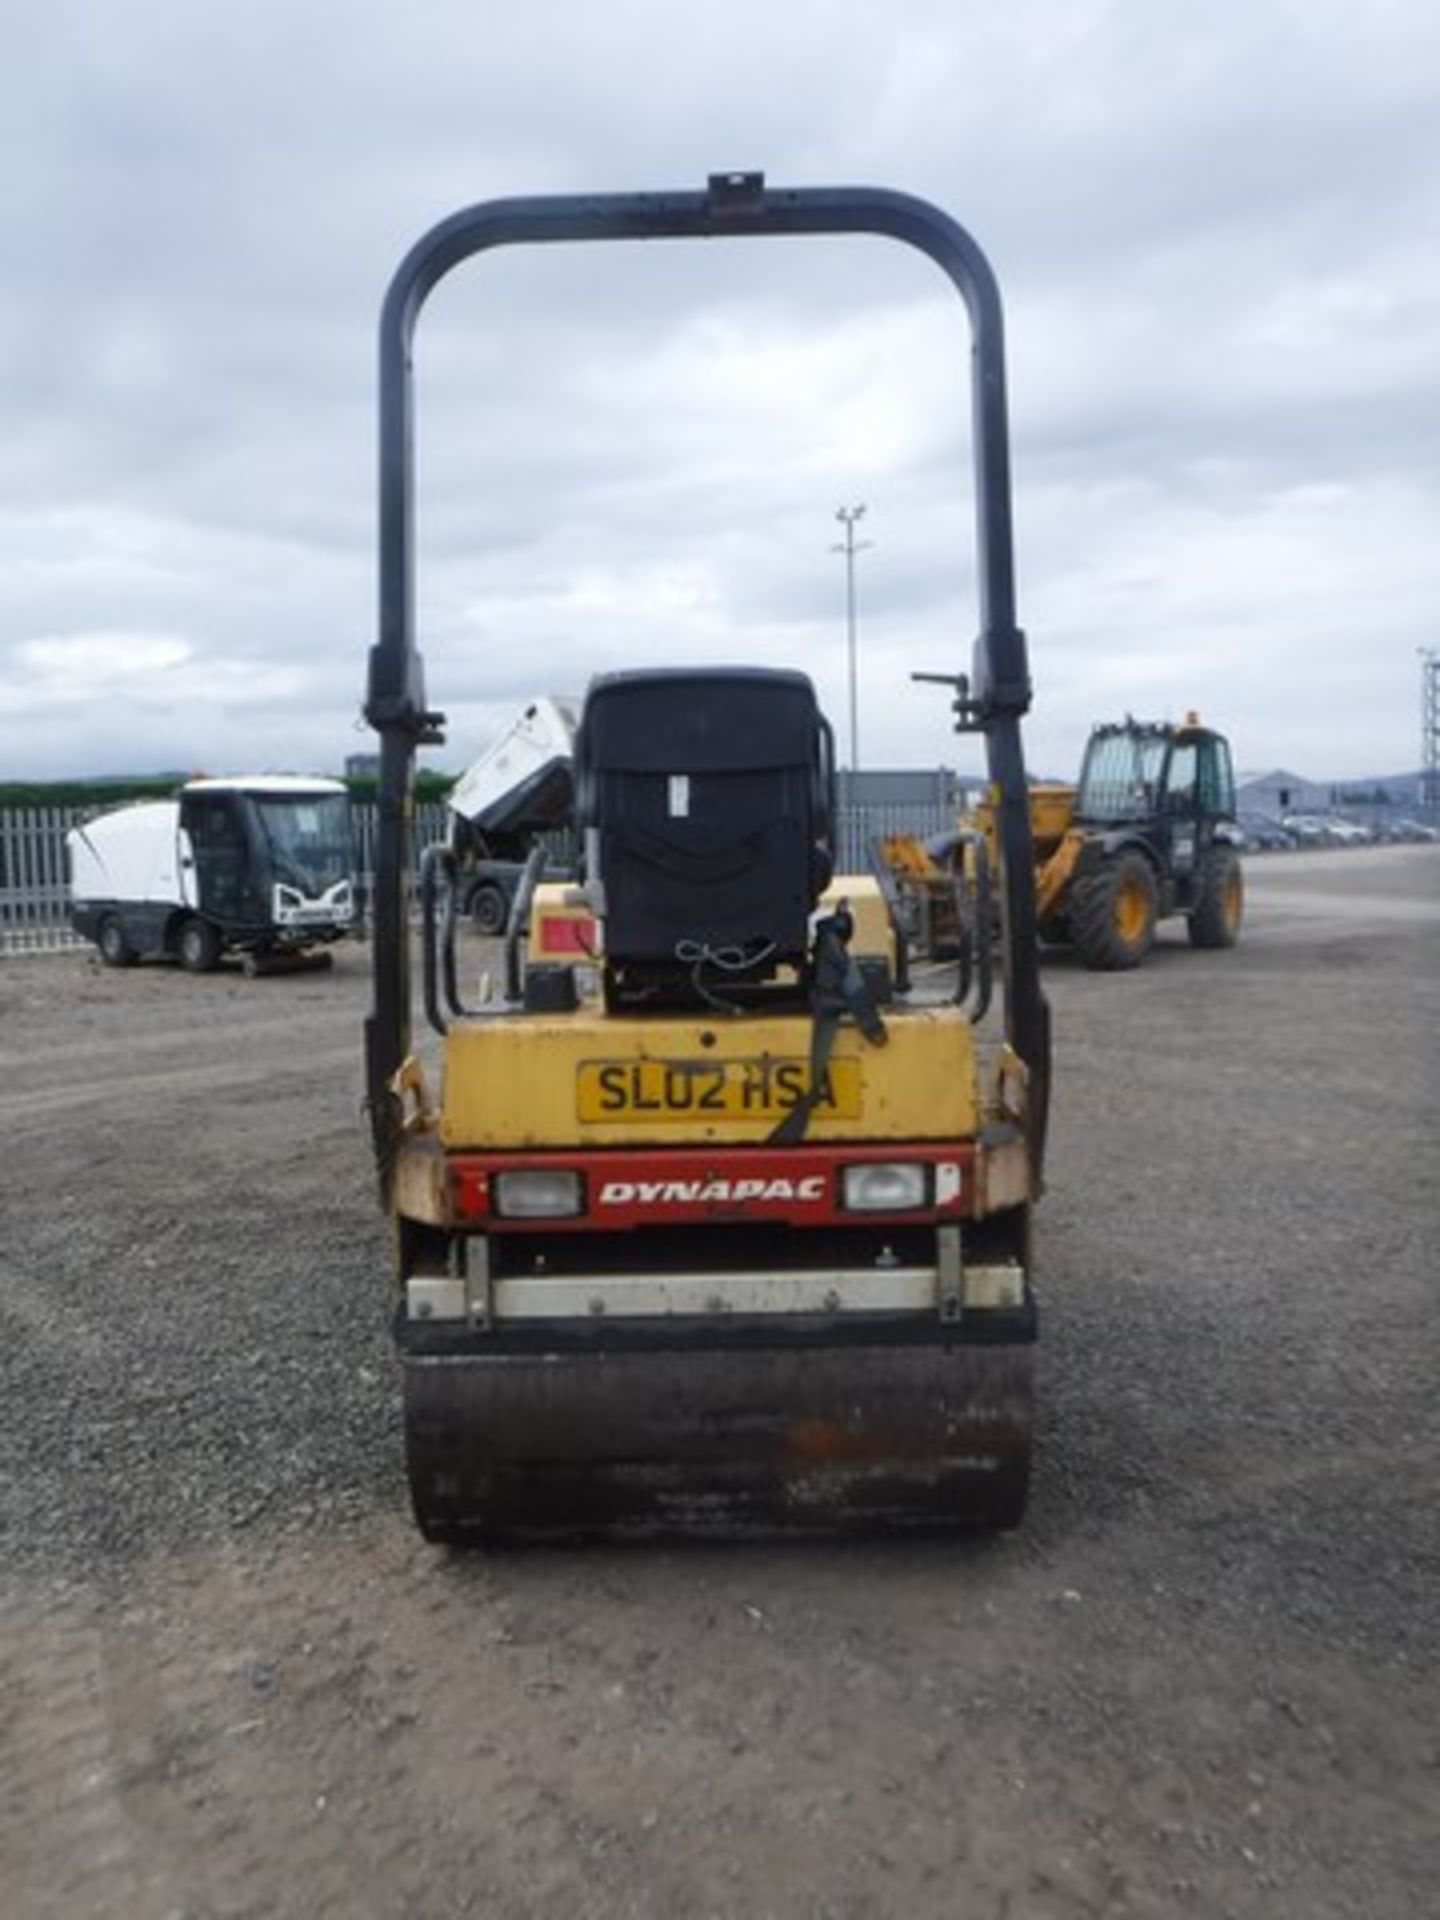 2002 DYNOPAC double drum roller. Service history. Reg No SL02 HSA. 2000hrs (not verified) - Image 11 of 14